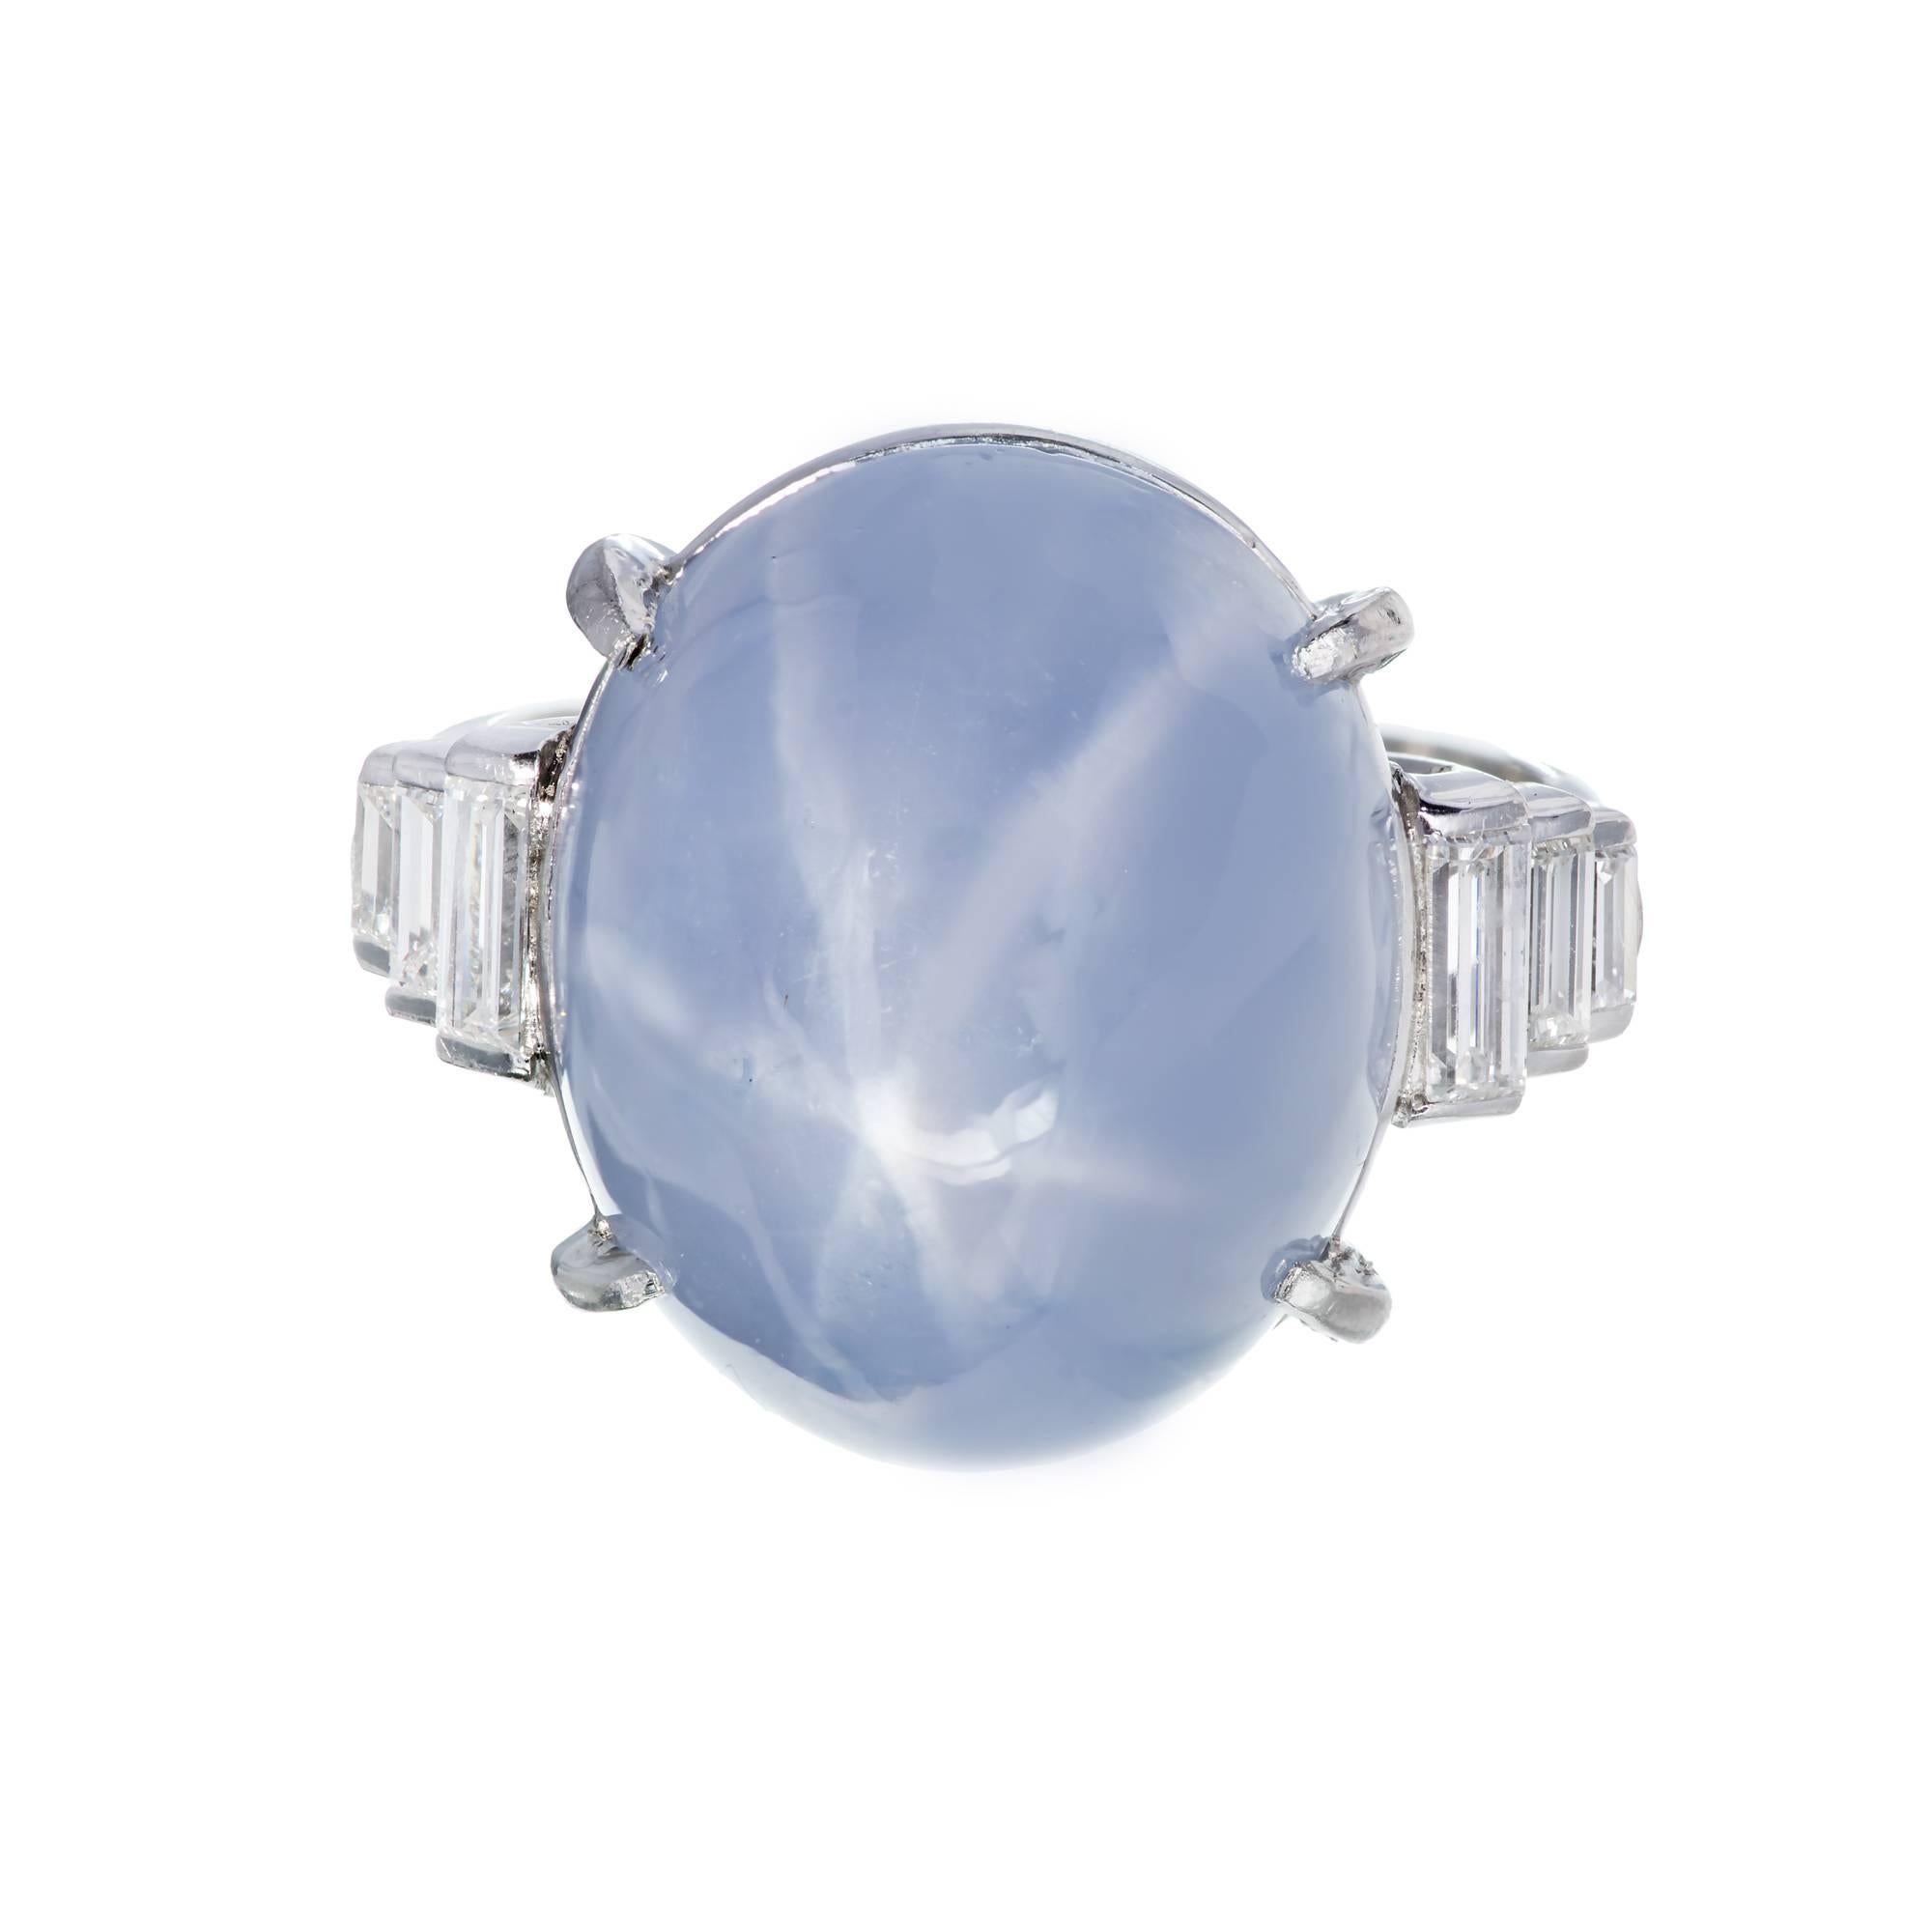 Art Deco 1920’s star sapphire engagement ring. GIA certified medium blue high dome cabochon star sapphire with a distinct 6 legged star. Handmade platinum setting with 6 straight cut graduated baguette side diamonds. Natural color and untreated.